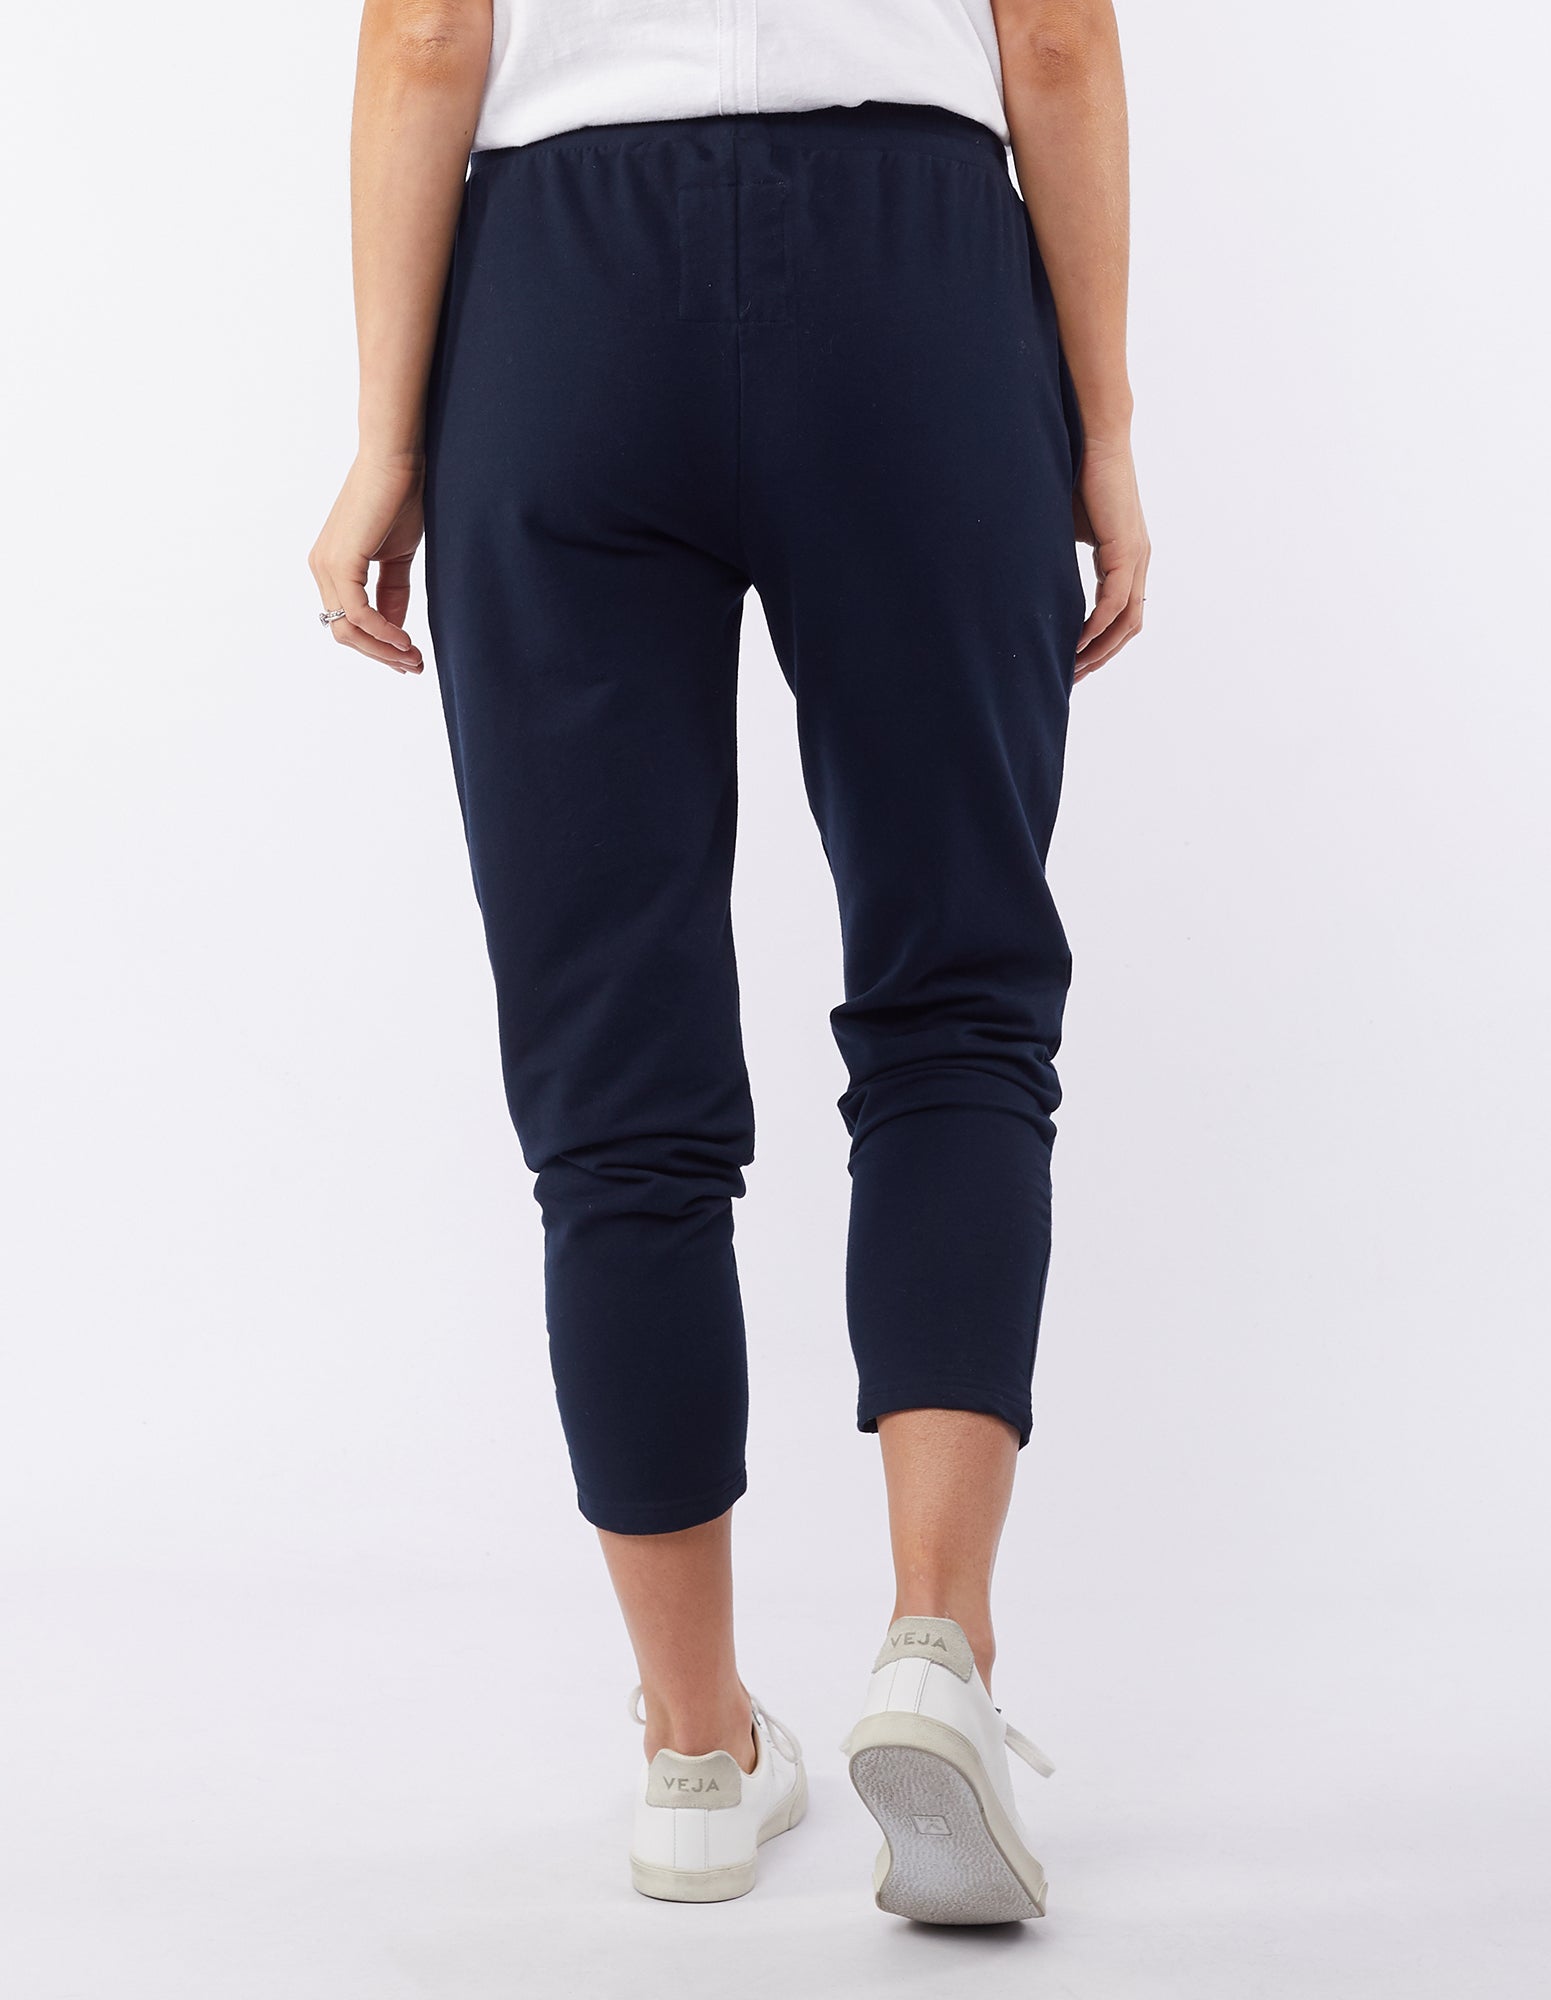 ELM LOBBY PANT - NAVY - THE VOGUE STORE